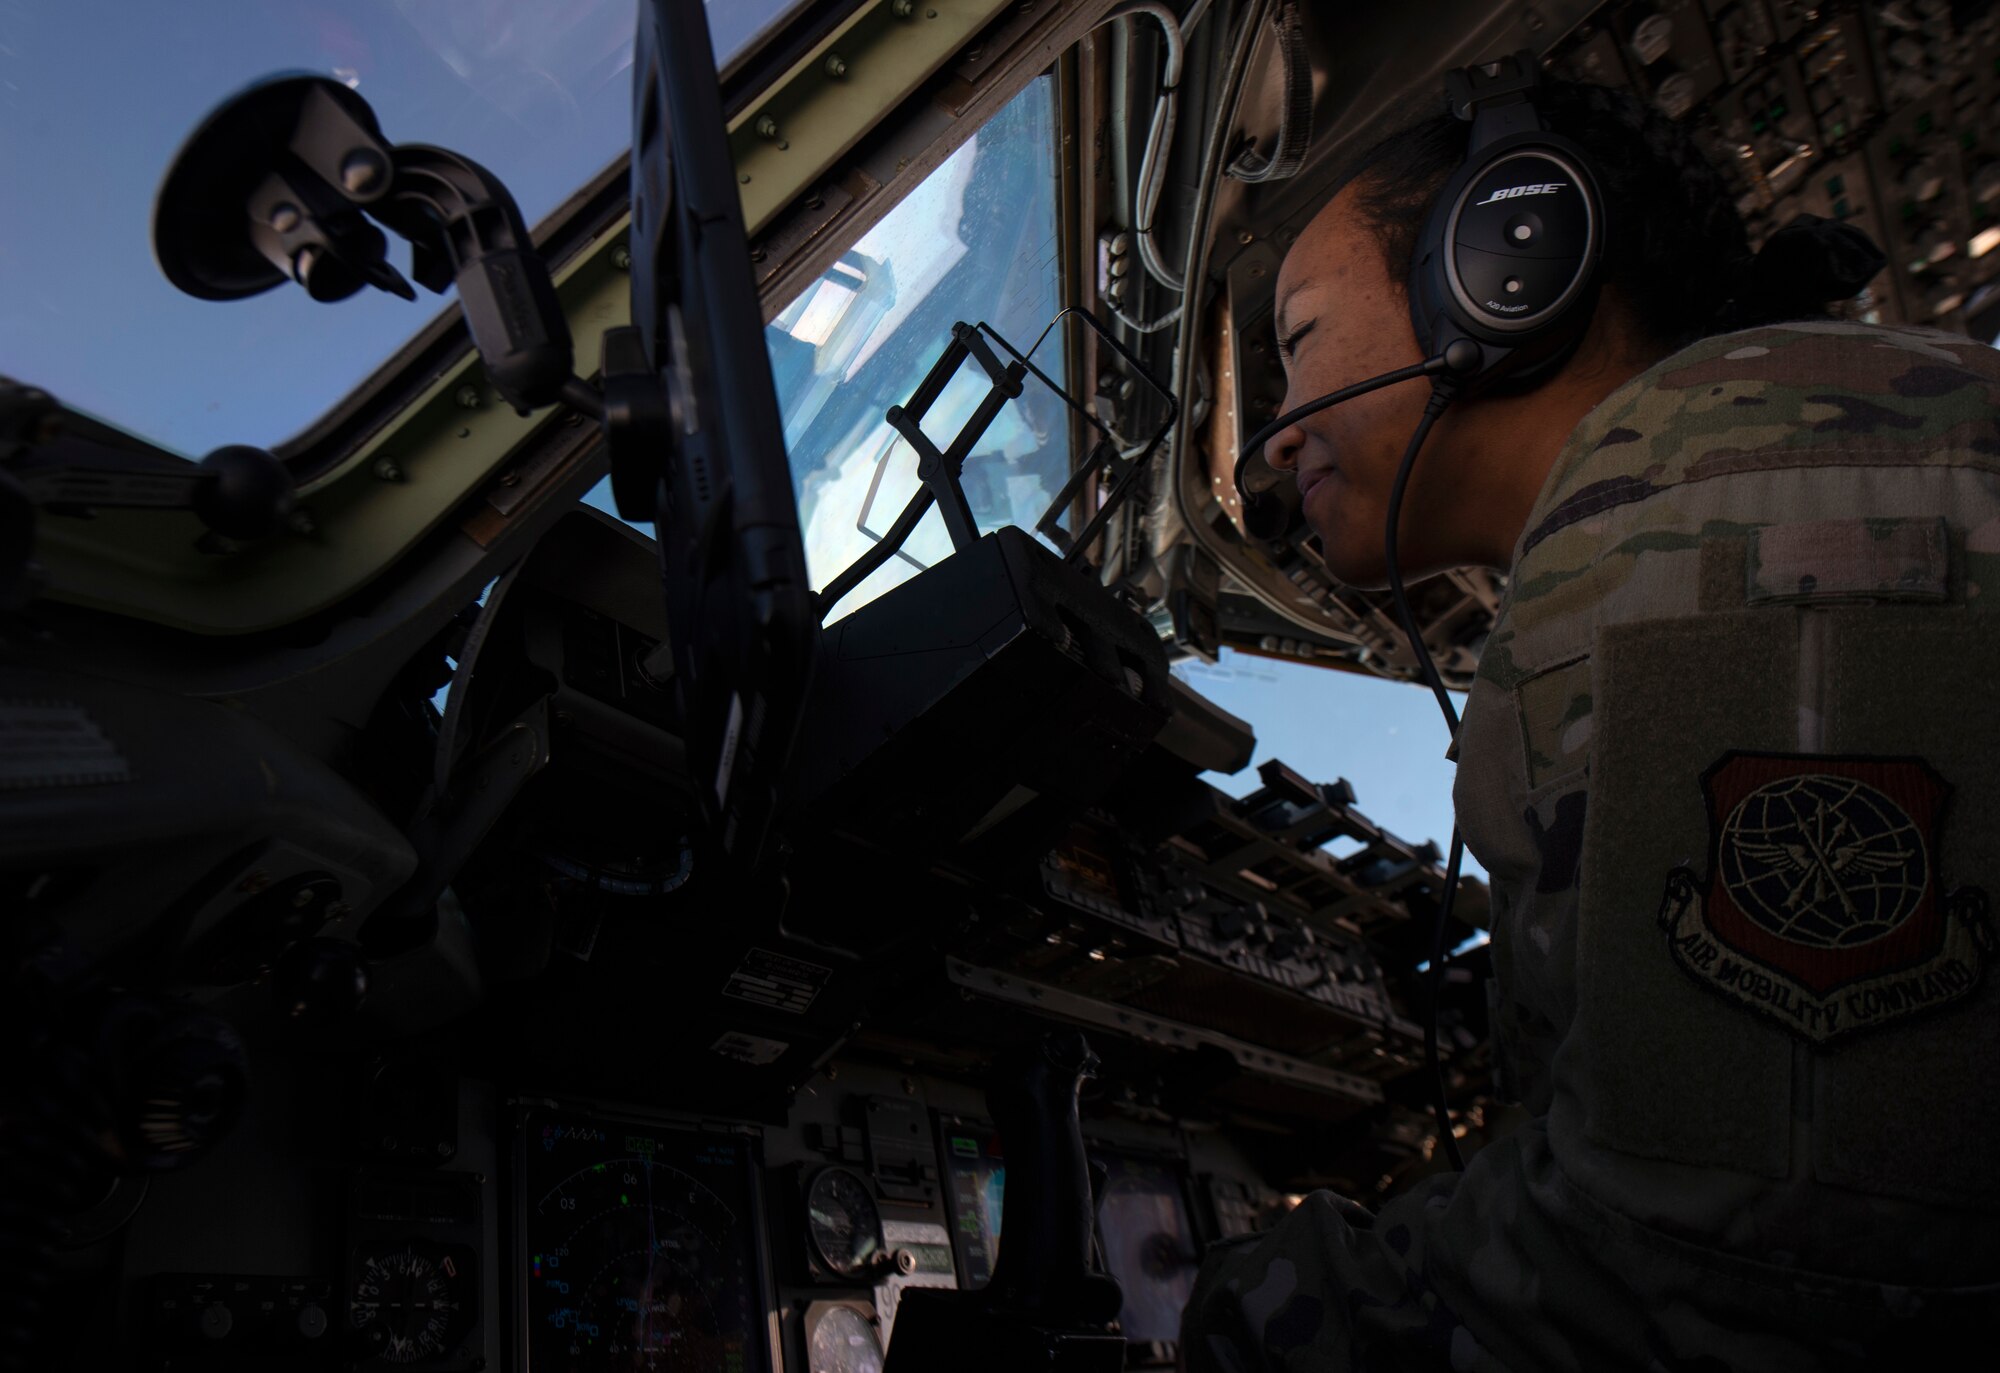 U.S. Air Force 1st Lt. Erica Drakes, 4th Airlift Squadron pilot, flies a C-17 Globemaster III carrying Airmen assigned to Joint Base Lewis-McChord, Washington; Joint Base McGuire-Dix-Lakehurst, New Jersey; and Dover Air Force Base, Delaware, deploying to the 816th Expeditionary Airlift Squadron at Al Udeid Air Base, Qatar, Nov. 28, 2021. Periodically throughout the year, C-17 squadrons within Air Mobility Command send Airmen to Al Udeid to perform airlift missions in the Allied Forces Central Europe area of responsibility. (U.S. Air Force photo by Staff Sgt. Tryphena Mayhugh)